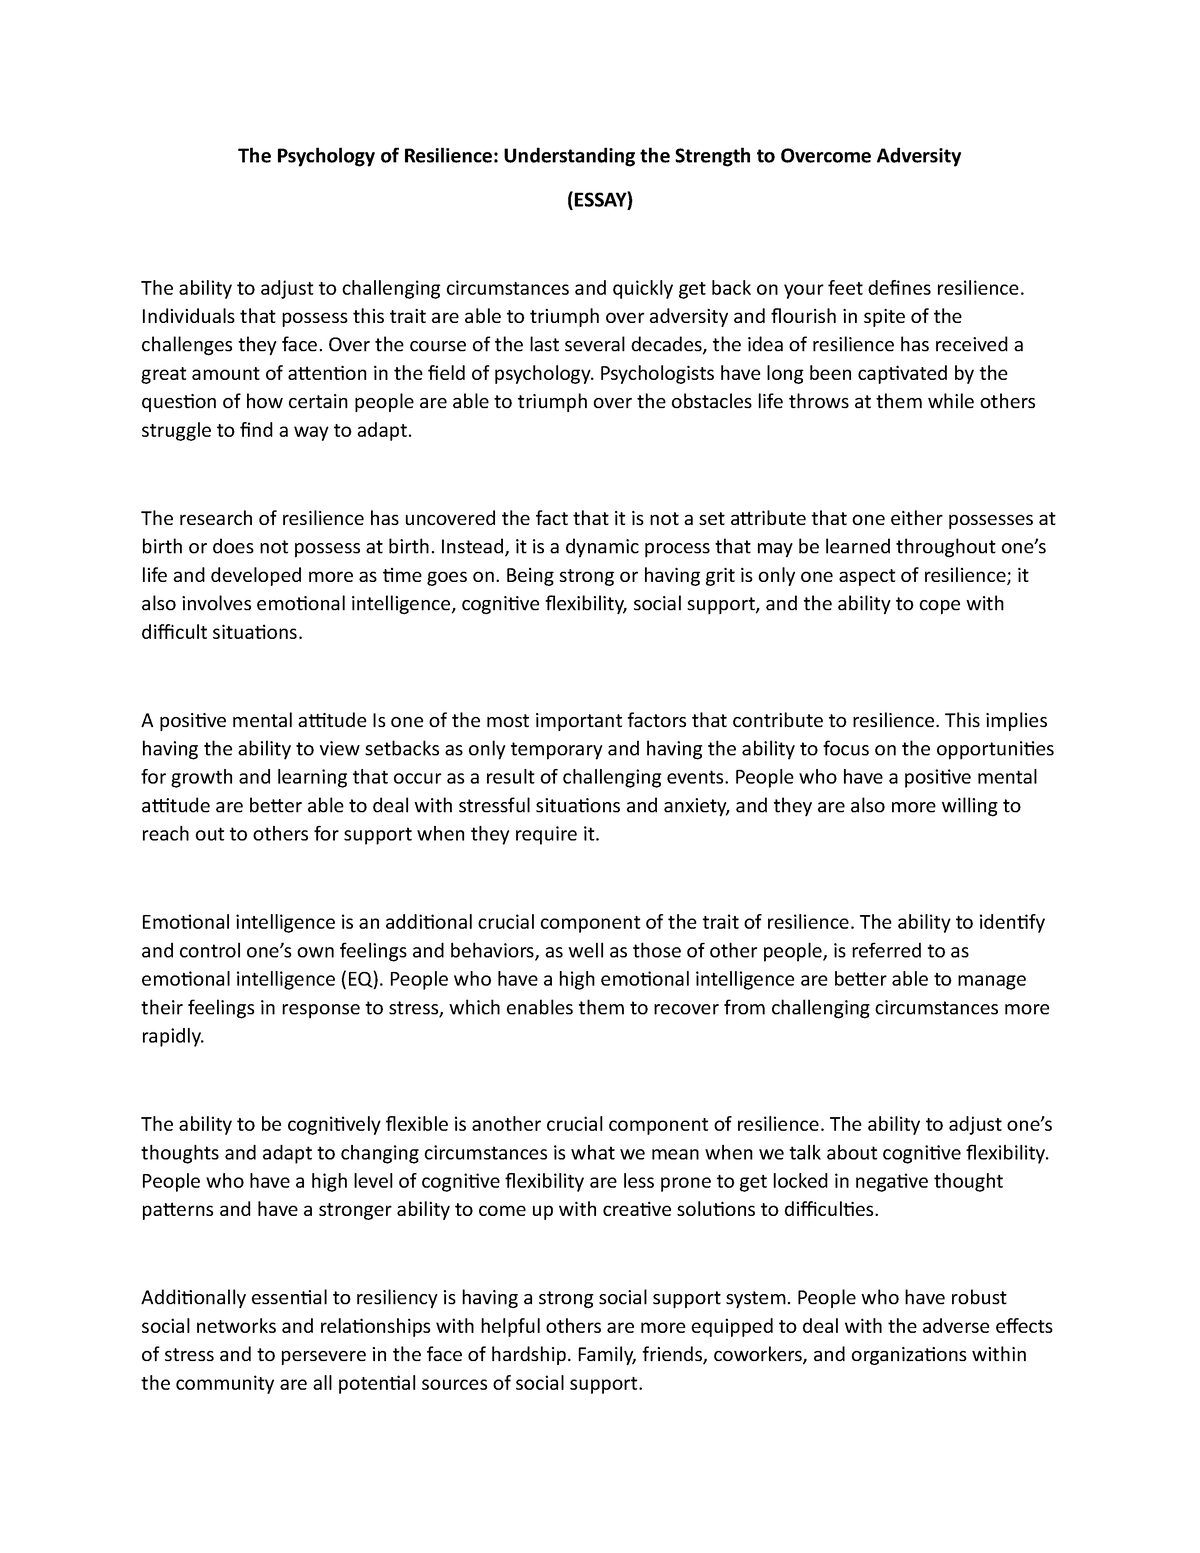 conclusion for overcoming adversity essay